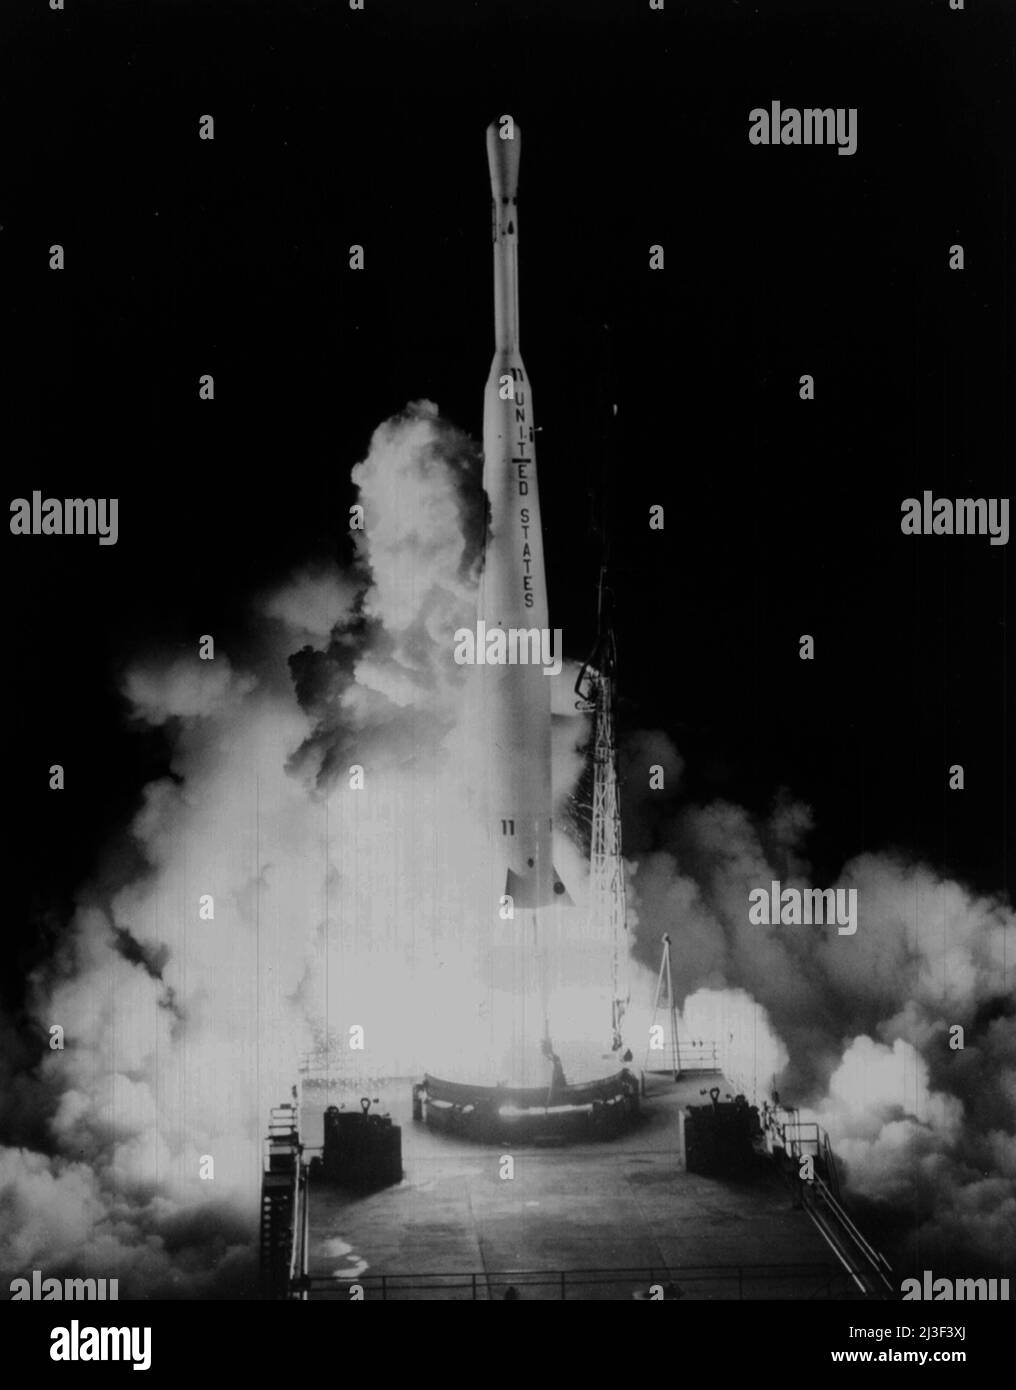 CAPE CANAVERAL, USA - 10 July 1962 - A Thor/Delta launches the Telstar 1 satellite from Cape Canaveral Air Force Station's Launch Complex 17B, July 10 Stock Photo